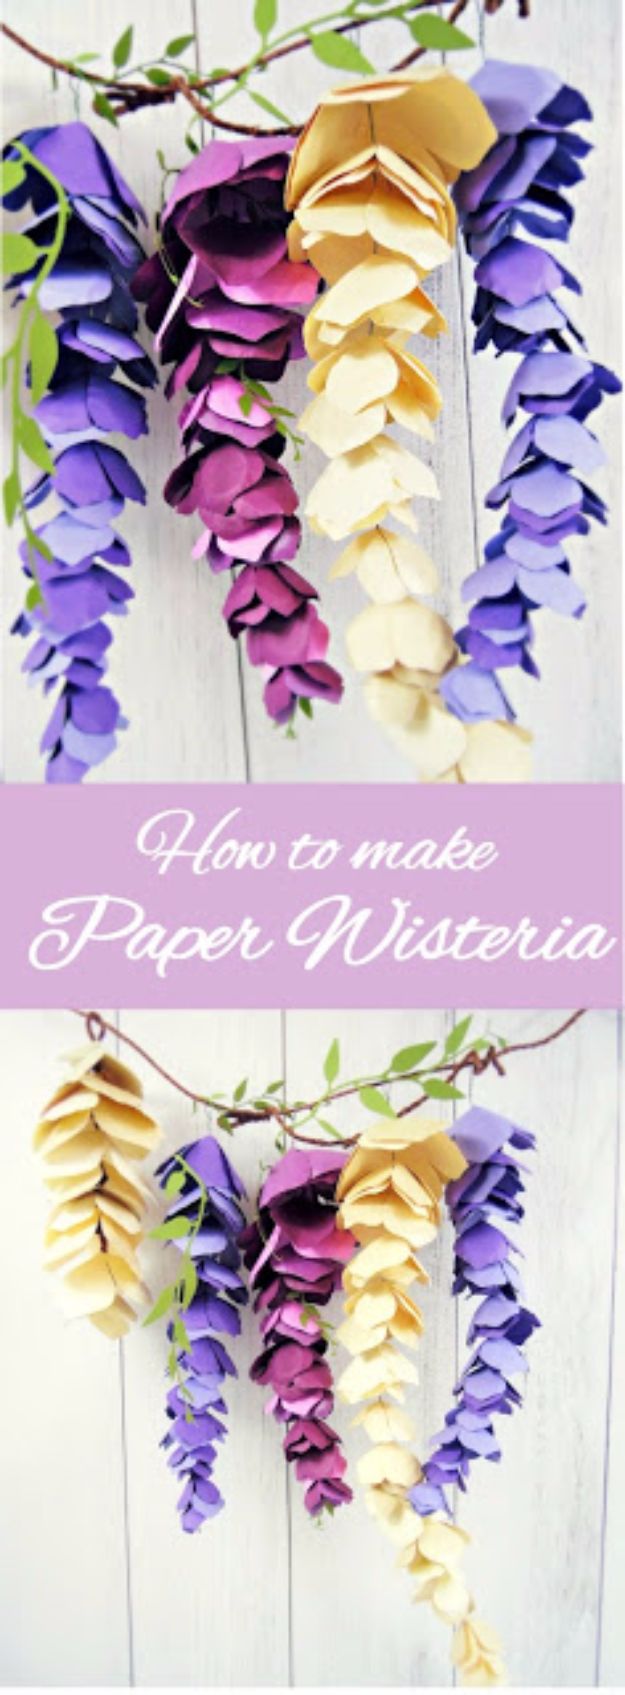 DIY Paper Flowers For Your Room - Hanging Paper Wisteria - How To Make A Paper Flower - Large Wedding Backdrop for Wall Decor - Easy Tissue Paper Flower Tutorial for Kids - Giant Projects for Photo Backdrops - Daisy, Roses, Bouquets, Centerpieces - Cricut Template and Step by Step Tutorial #papercrafts #paperflowers #teencrafts